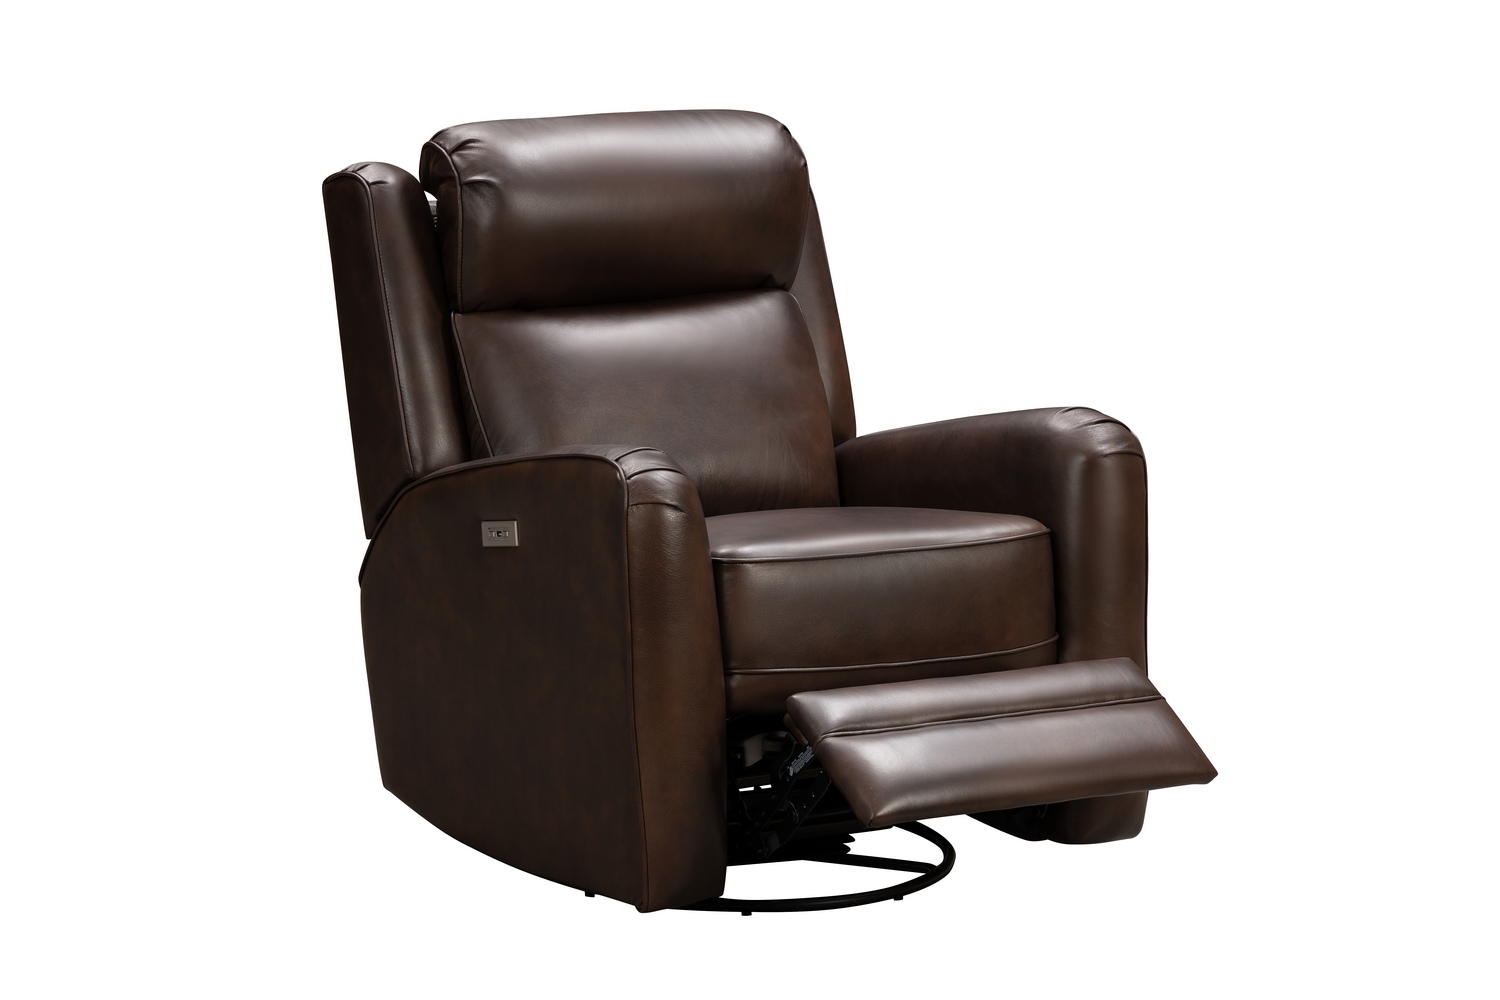 Barcalounger Kennedy Big and Tall Power Swivel Recliner Chair with Power Head Rest - Tonya Brown/Leather Match